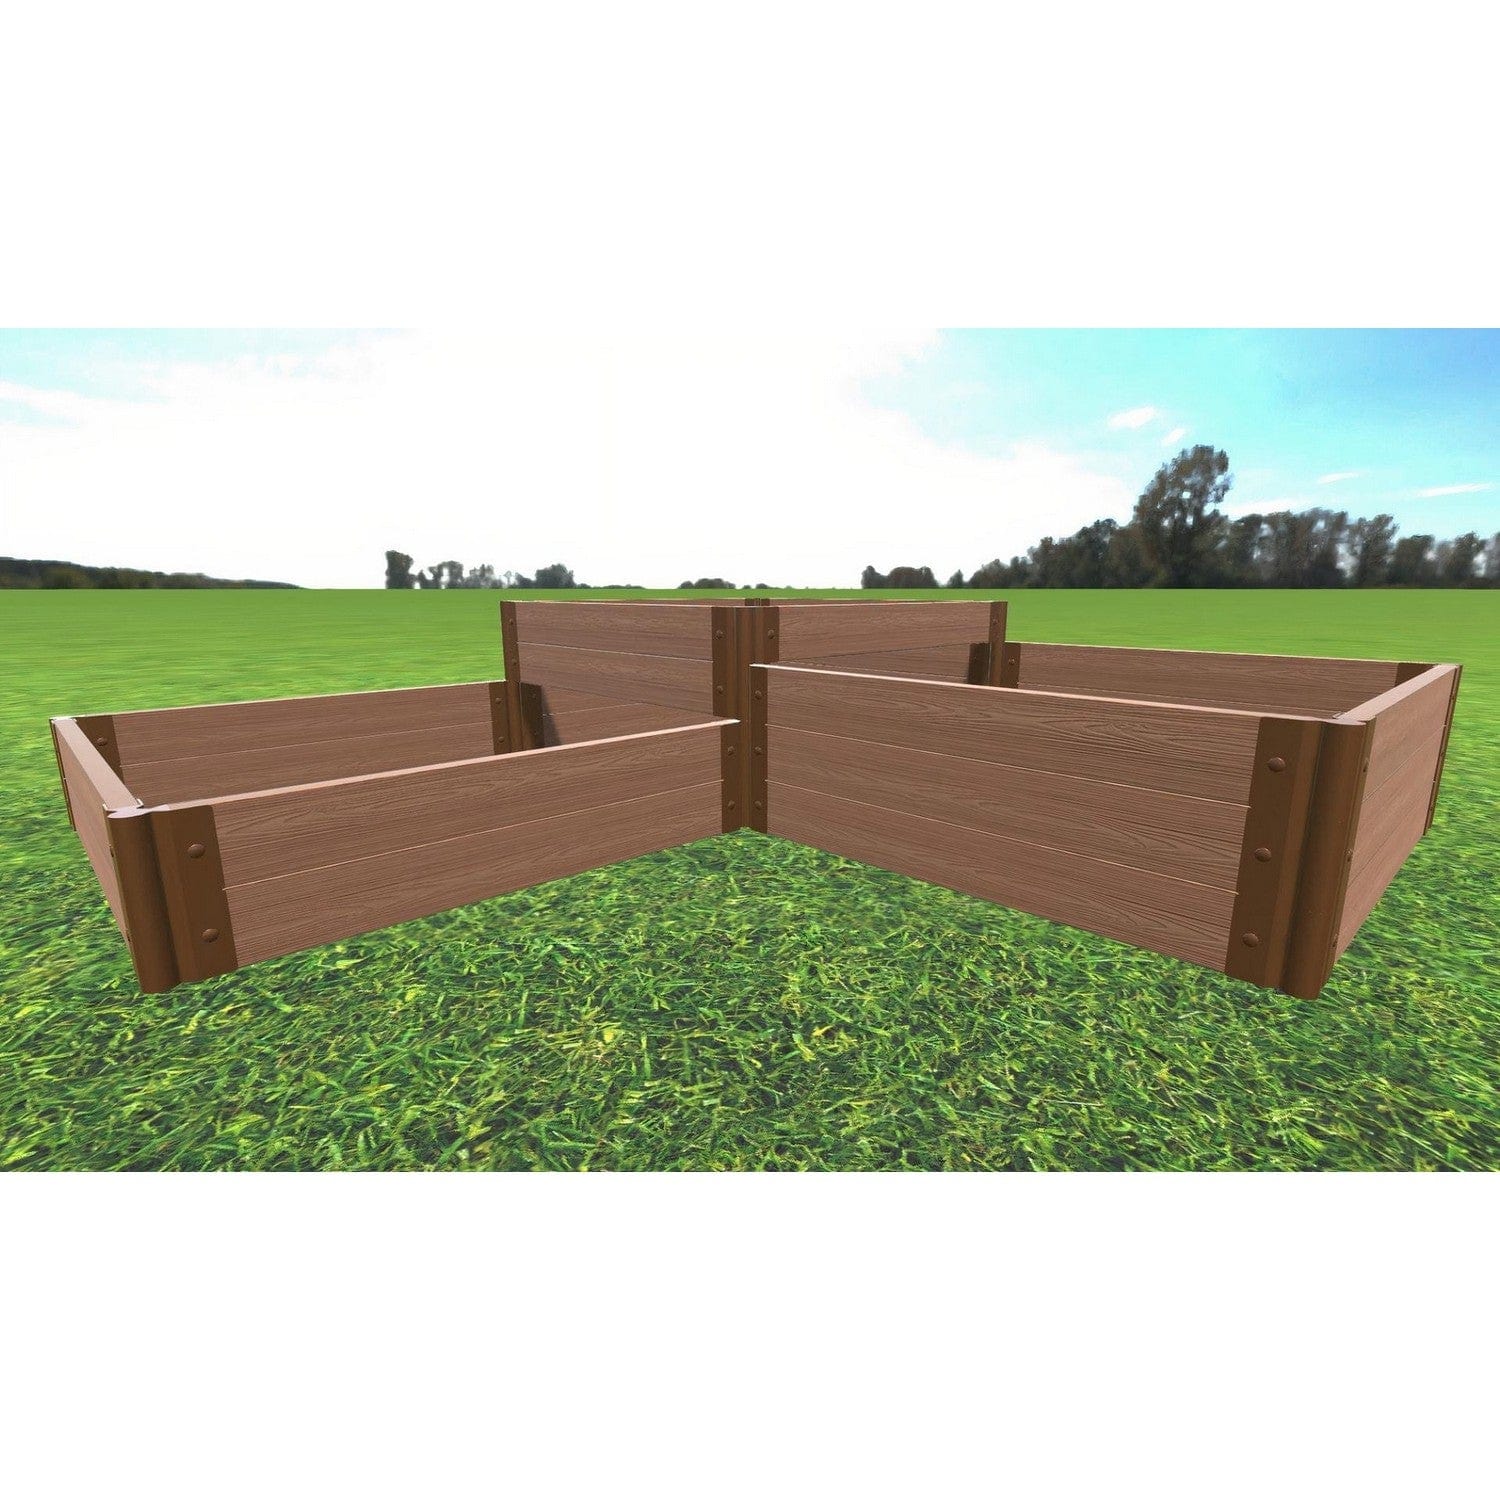 Frame It All Gardening Accessories 1" Frame It All | Tool-Free Fort Knox Straight Corner Raised Garden Bed (Tri-Level) 8' X 8' X 22" - Classic Sienna 800002021